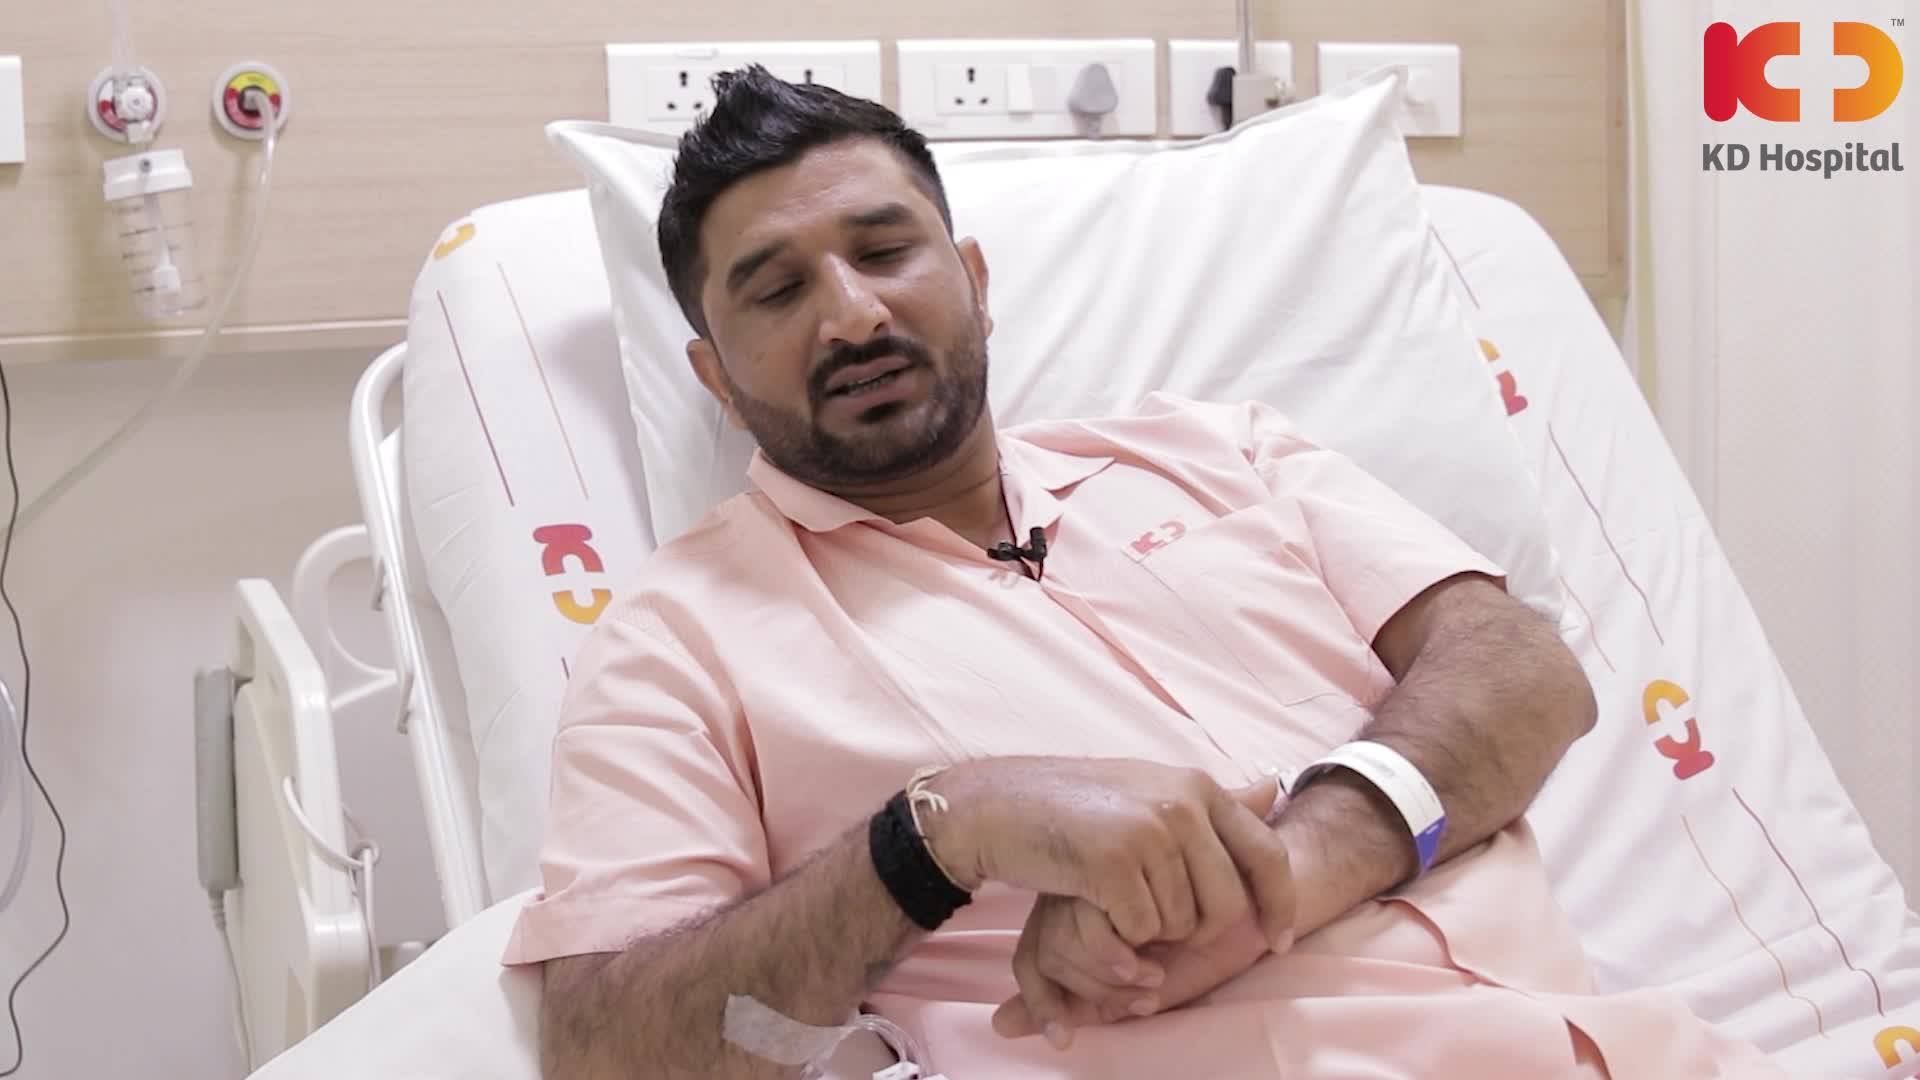 Let's hear Gaman Santhal again

KD Hospital feels overwhelmed by finding a place in the Heart of  Gaman Santhal who is extremely talented and popular as a Gujarati Singer and Lyricist

Let's watch Gaman Santhal's journey as a Patient in KD Hospital...

#KDHospital #Compassion #Doctors  #Diagnosis #Therapeutics #goodhealth #patienttestimonial #patient #testimonial #testimony #soical #socialmediamarketing #digitalmarketing #wellness #wellnessthatworks #Ahmedabad #Gujarat #India